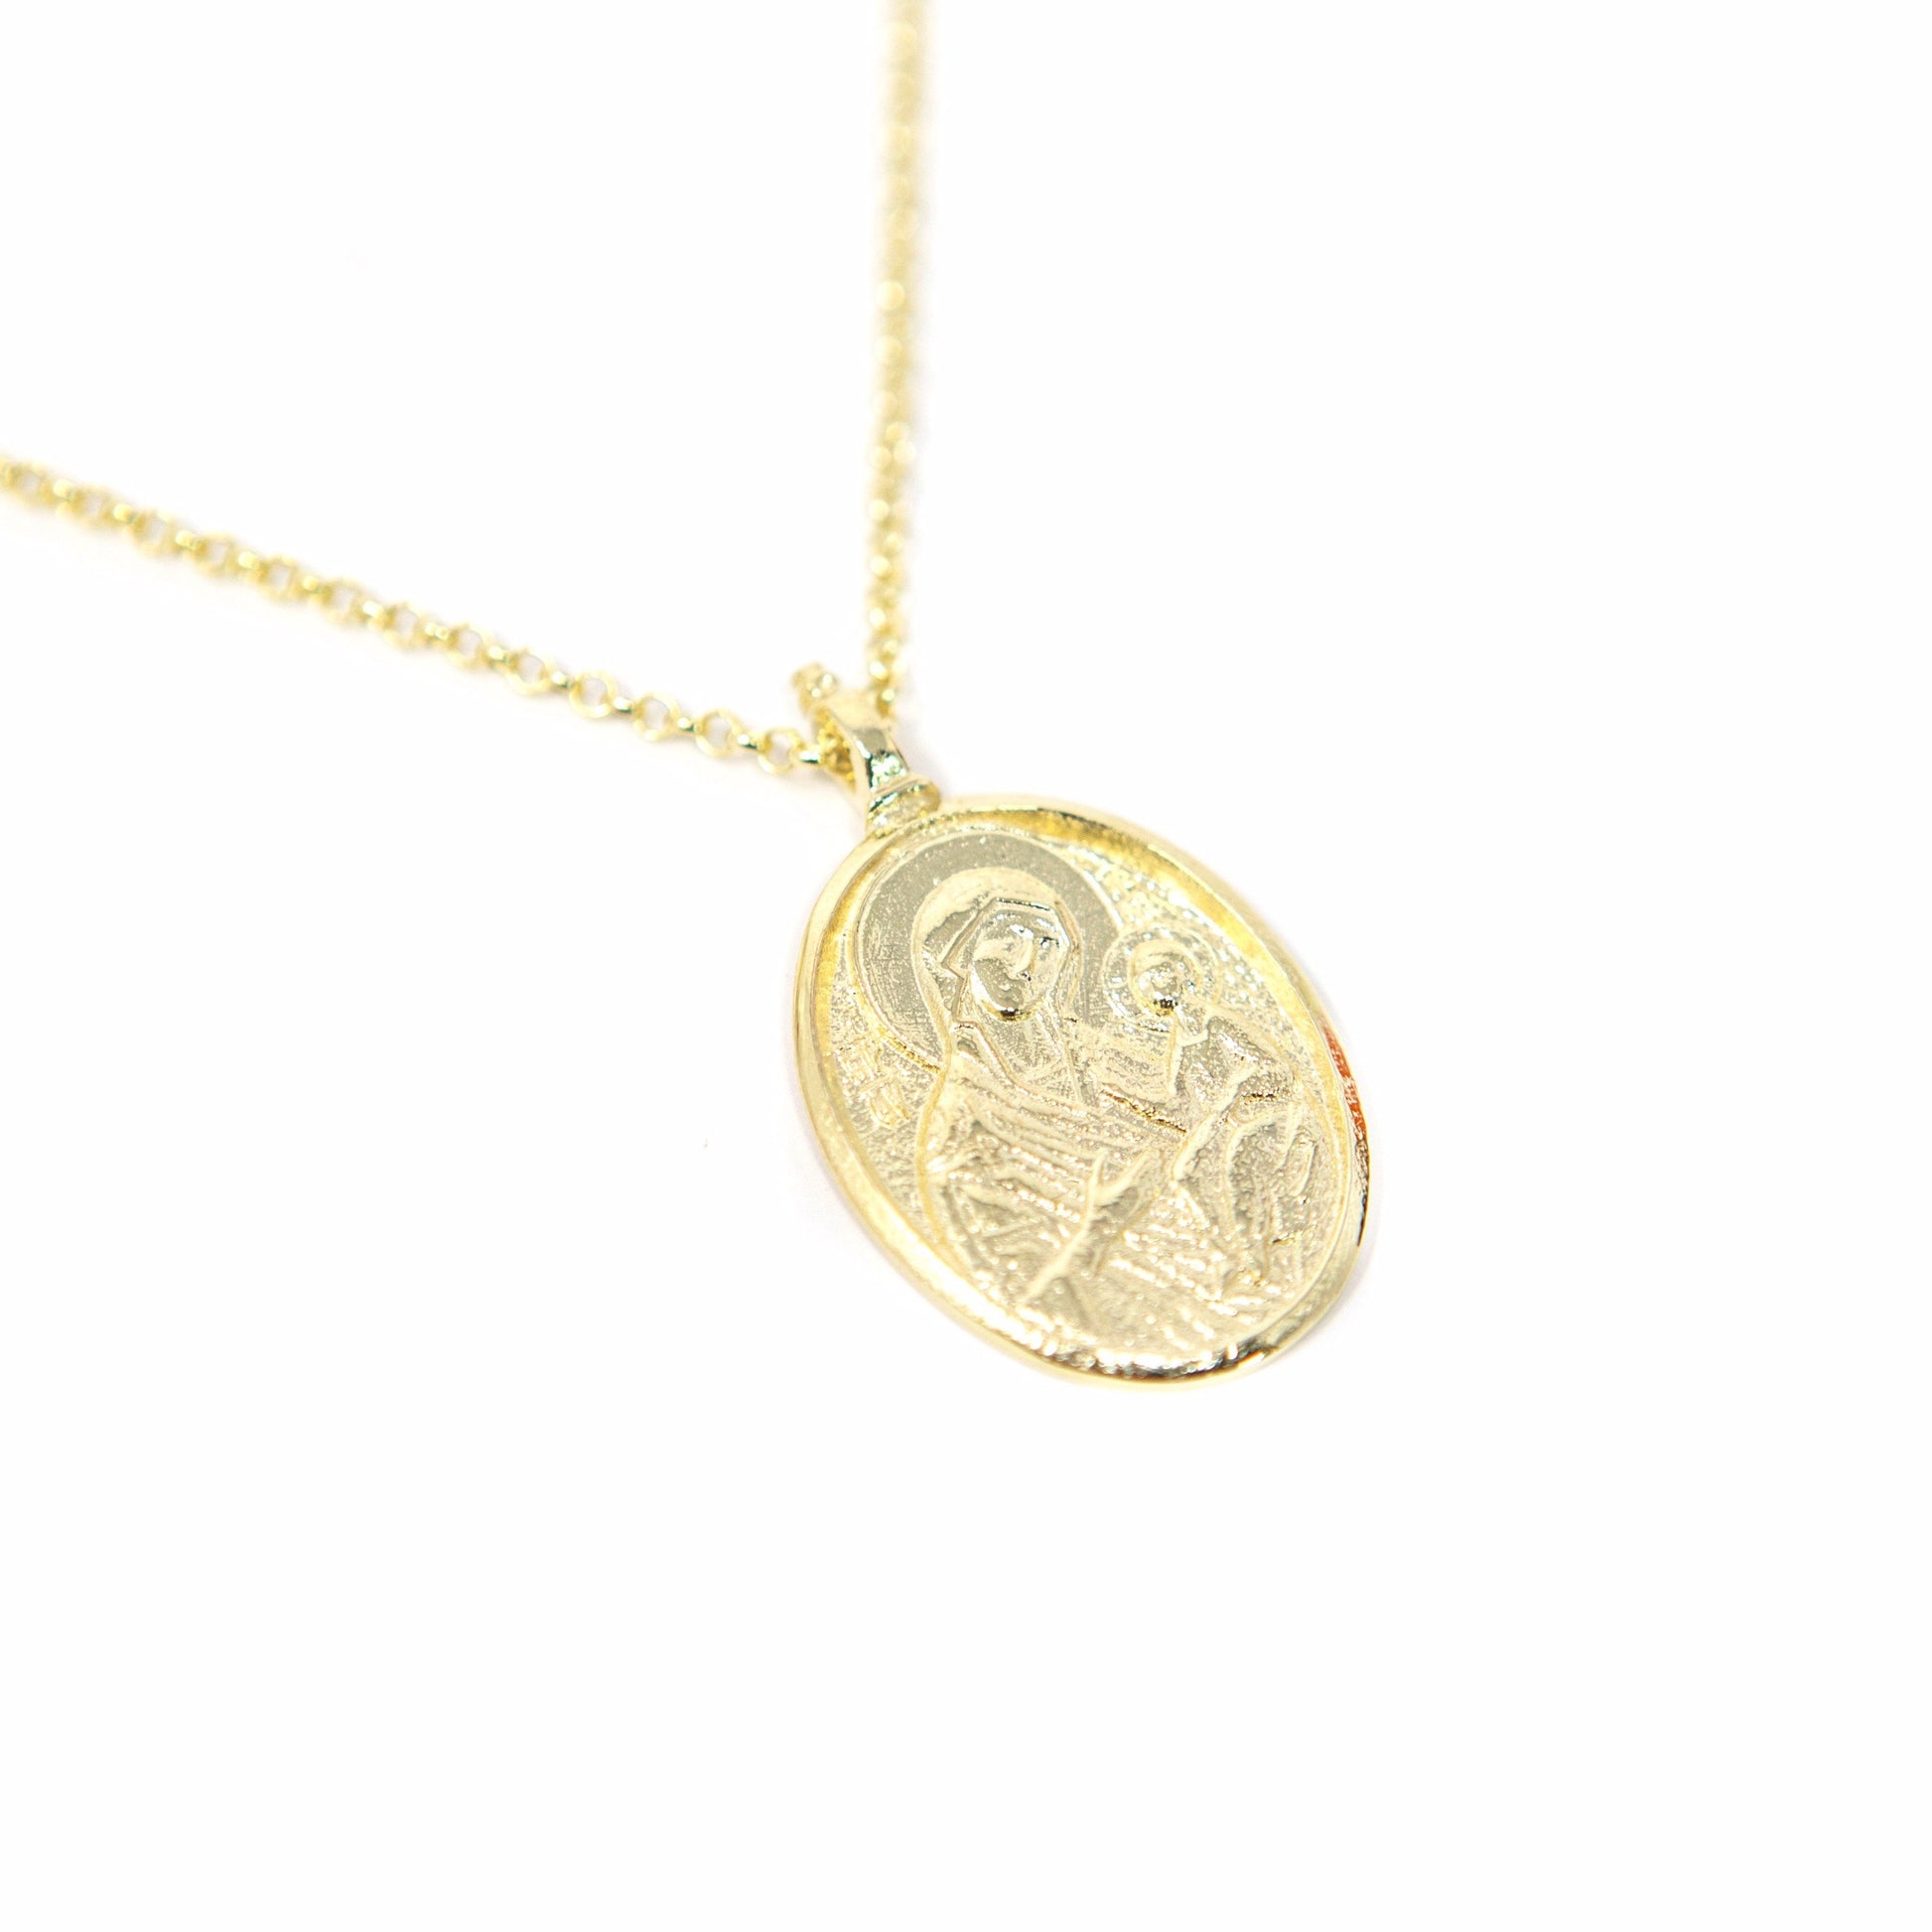 Share the Faith - Oval Pendants necklace The Sis Kiss Mother and Child Pendant 